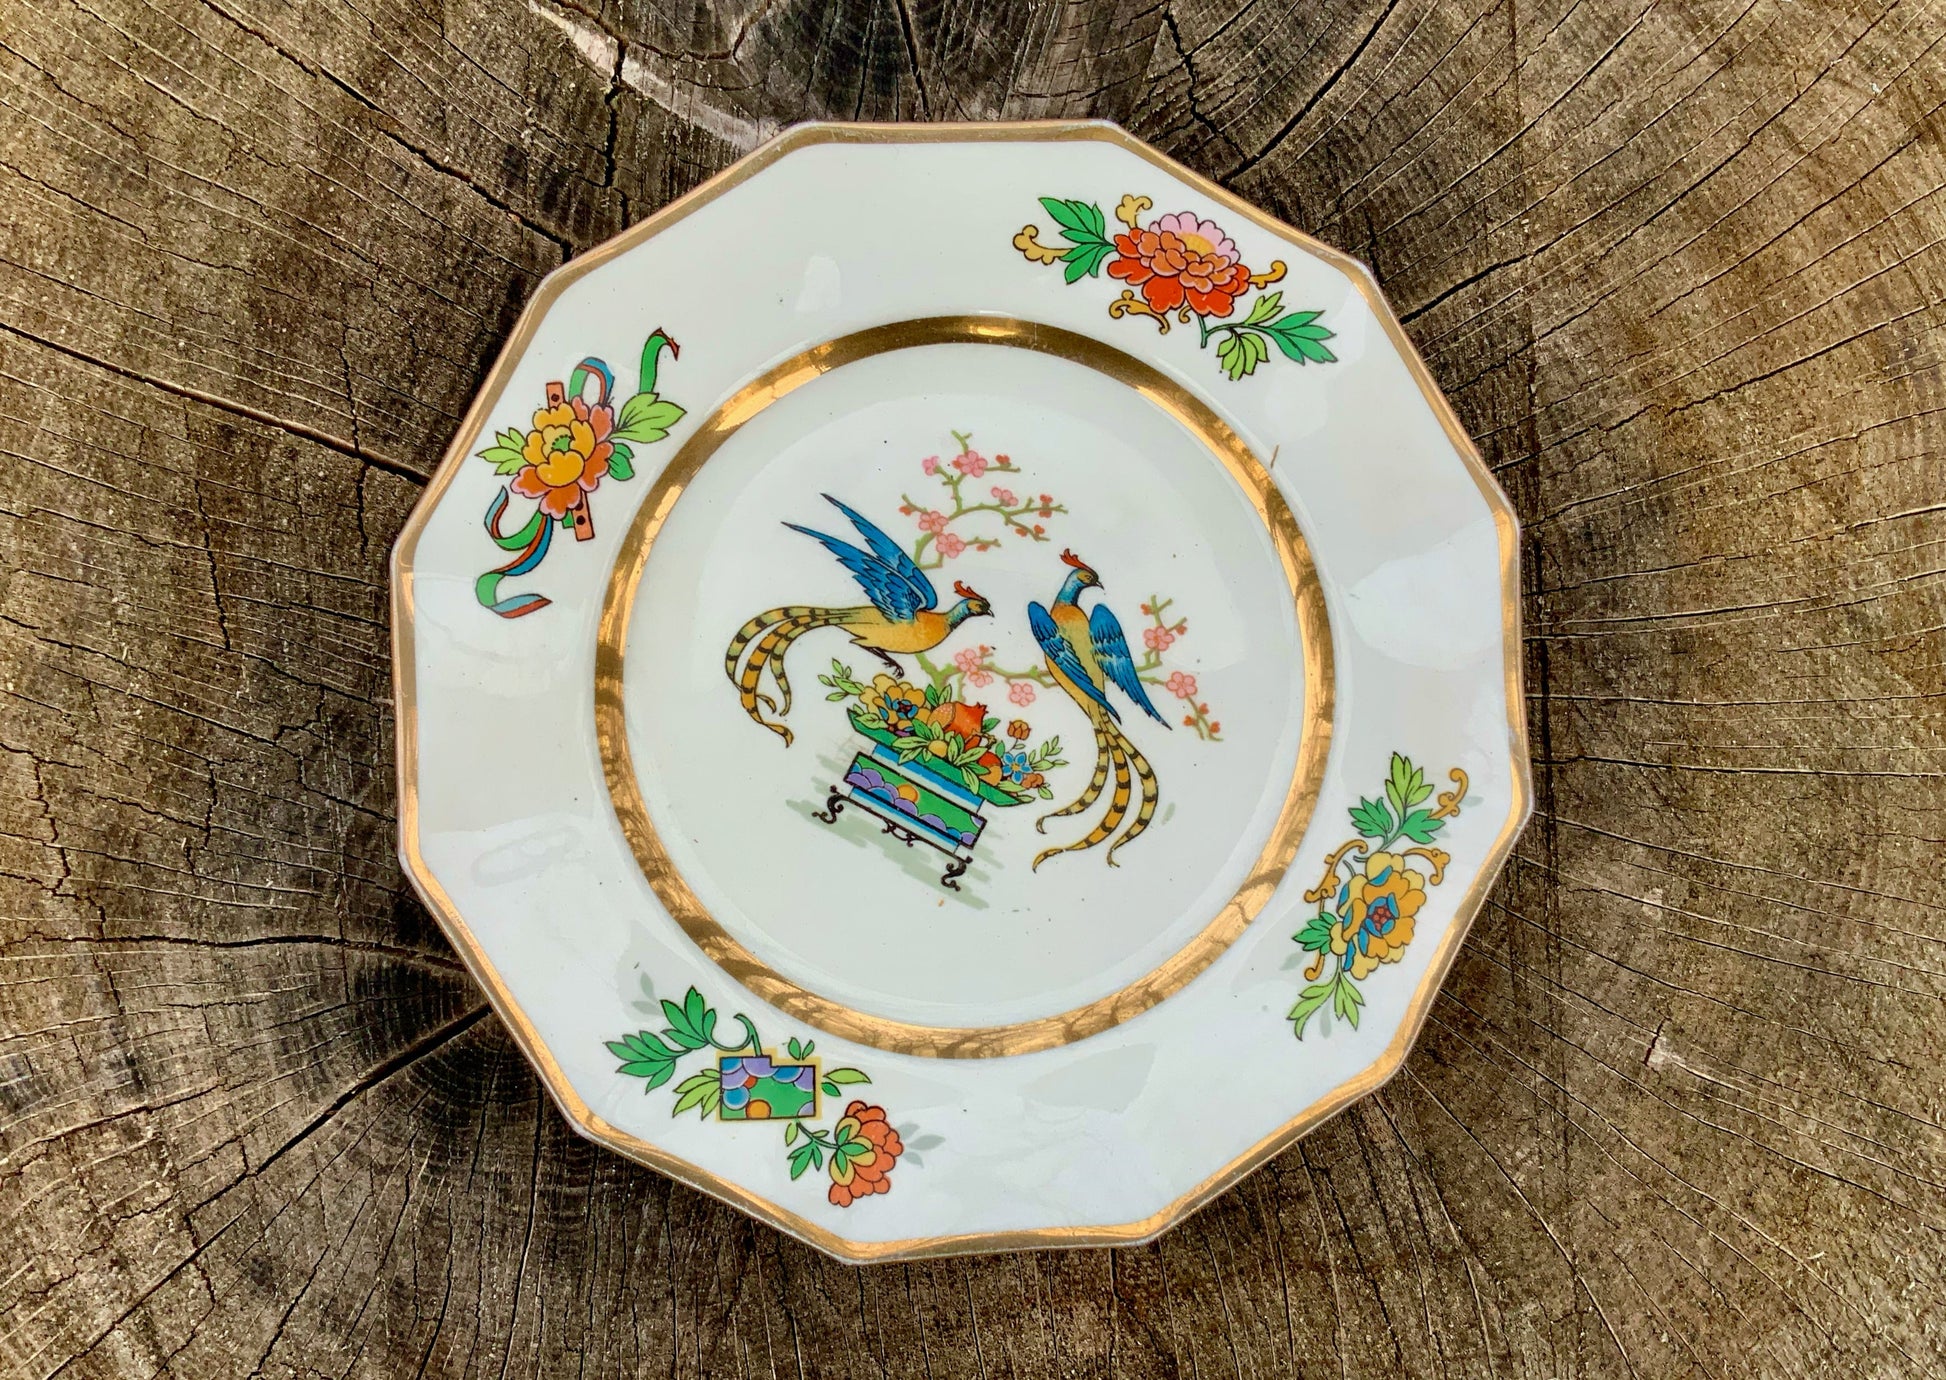 Johnson Brothers Fushan Pattern - Bread or Cake Plates (sold as set of 4) #JohnsonBrothers #ChinoiserieBirds #ClassicDesign - DharBazaar